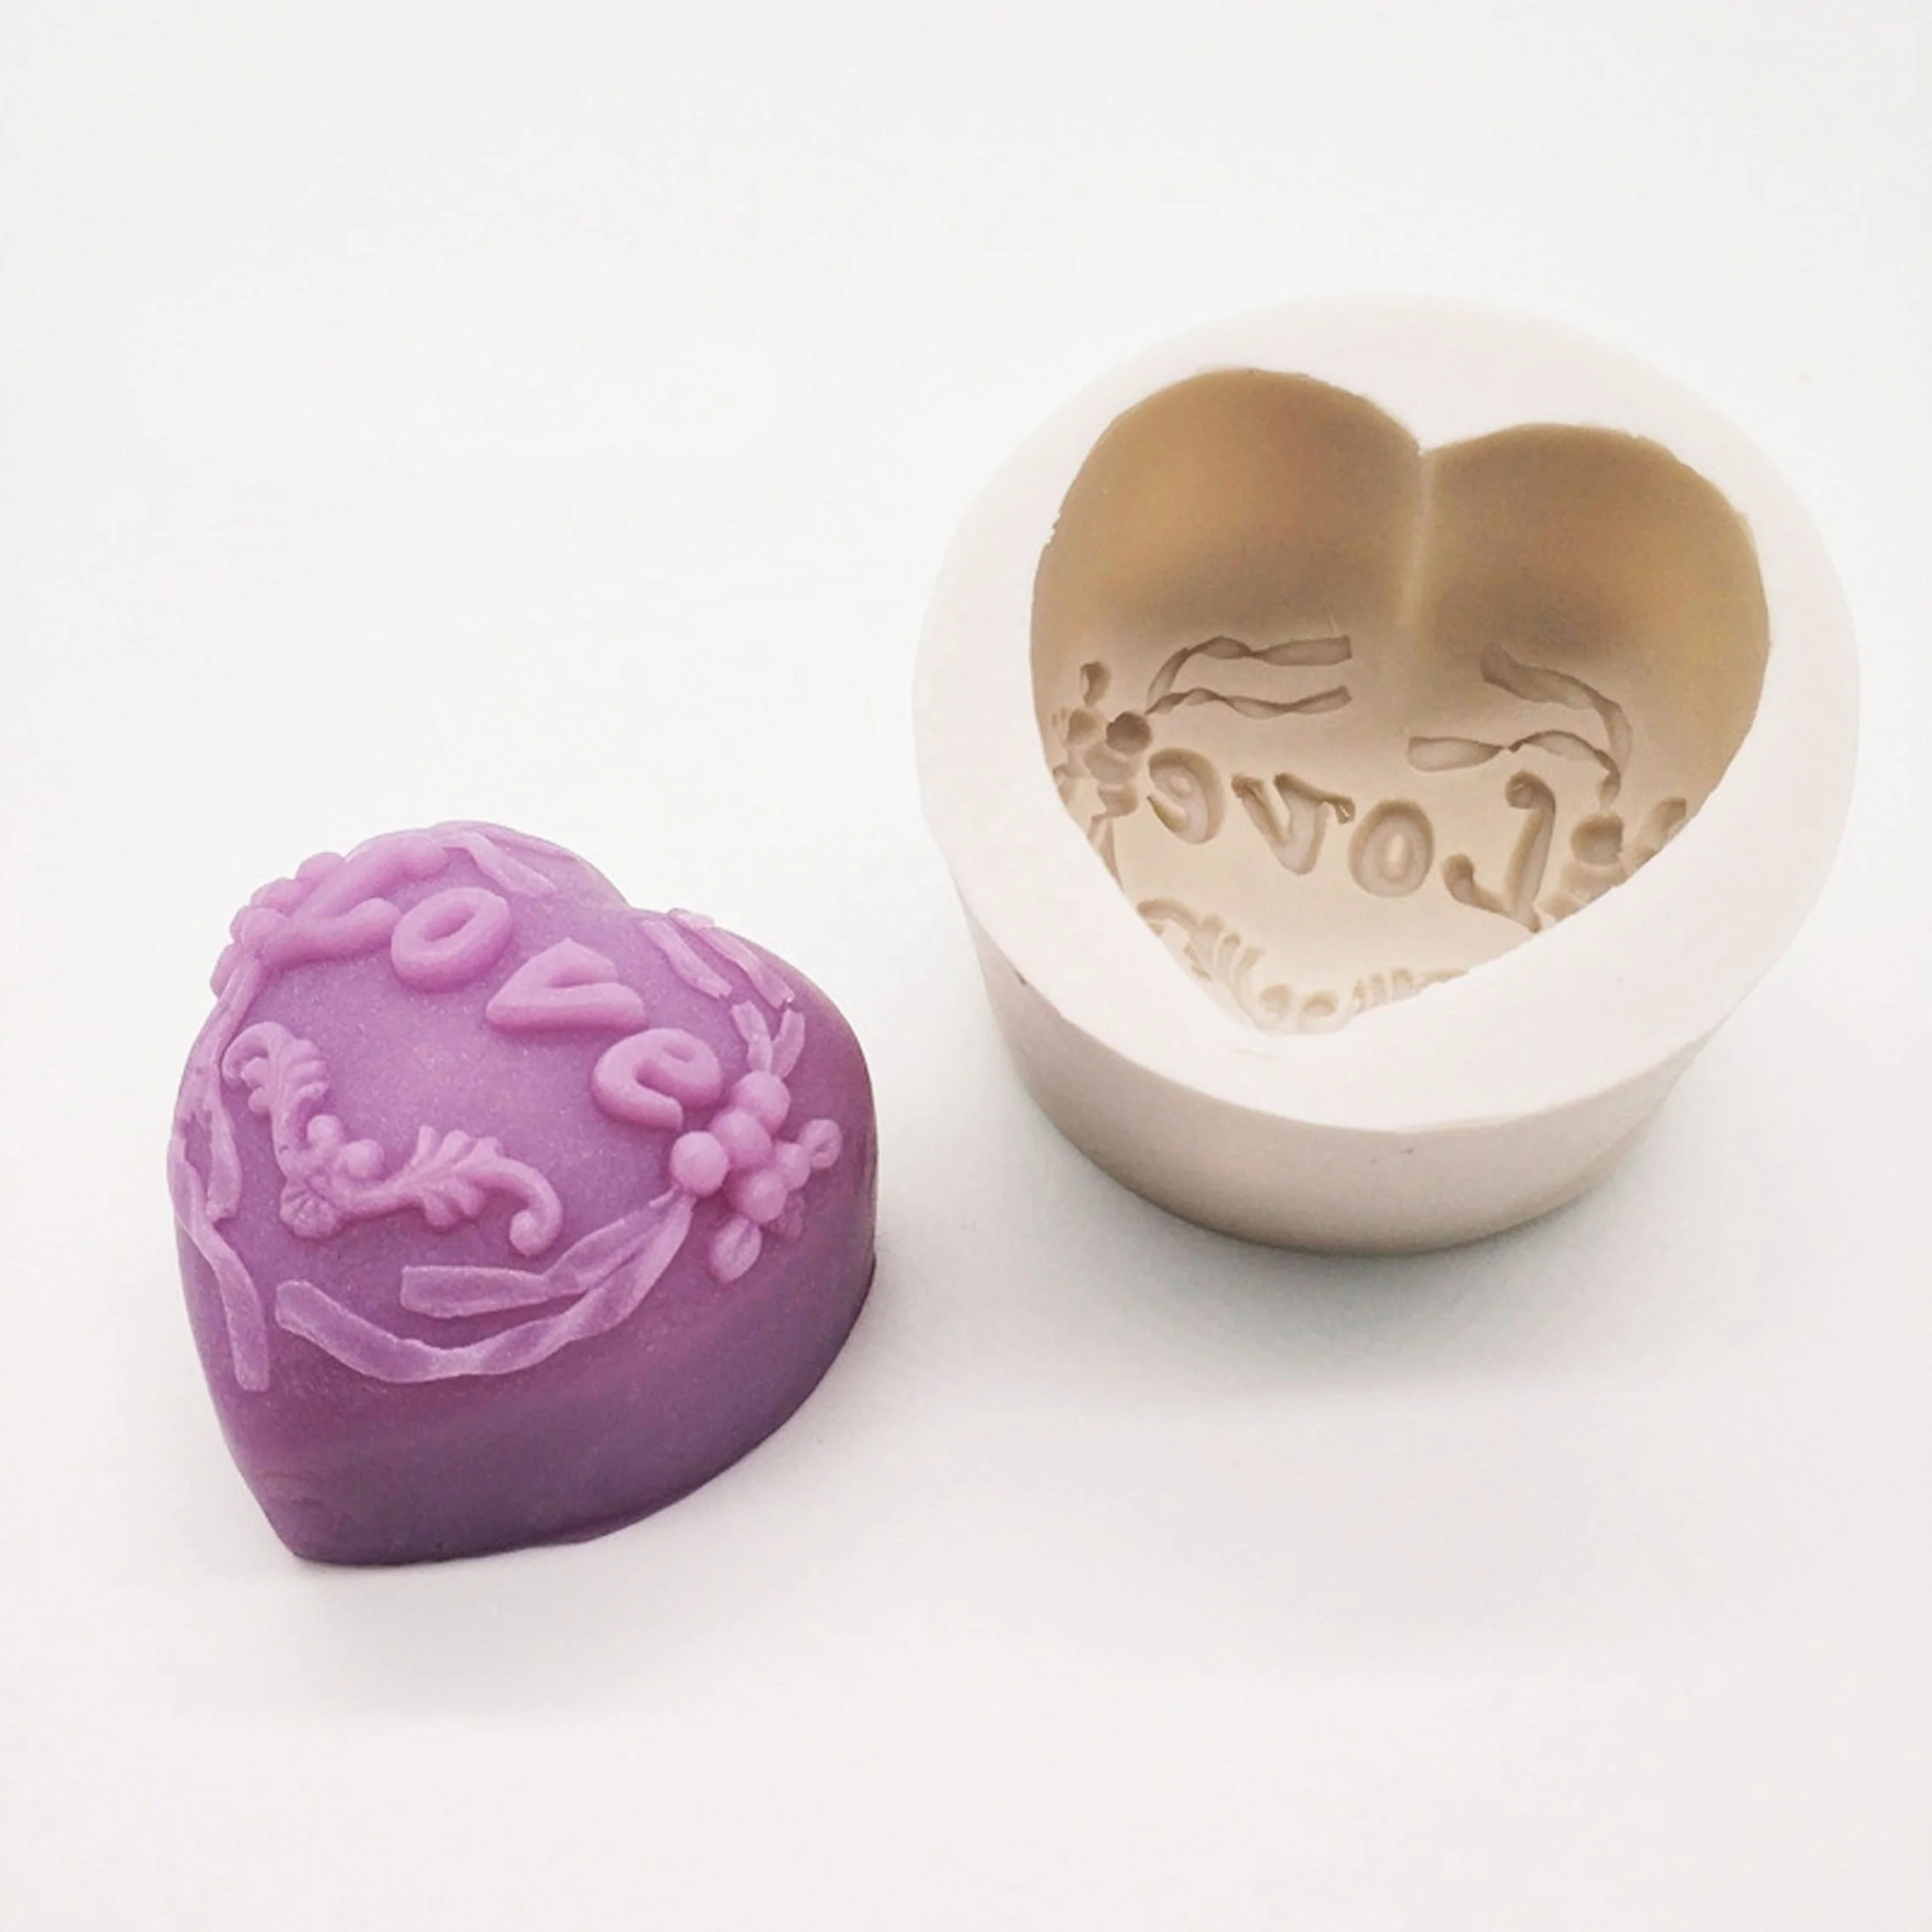 1 cavity heart shaped rose flower 3D non stick silicone cake mold chocolate mold cake tools